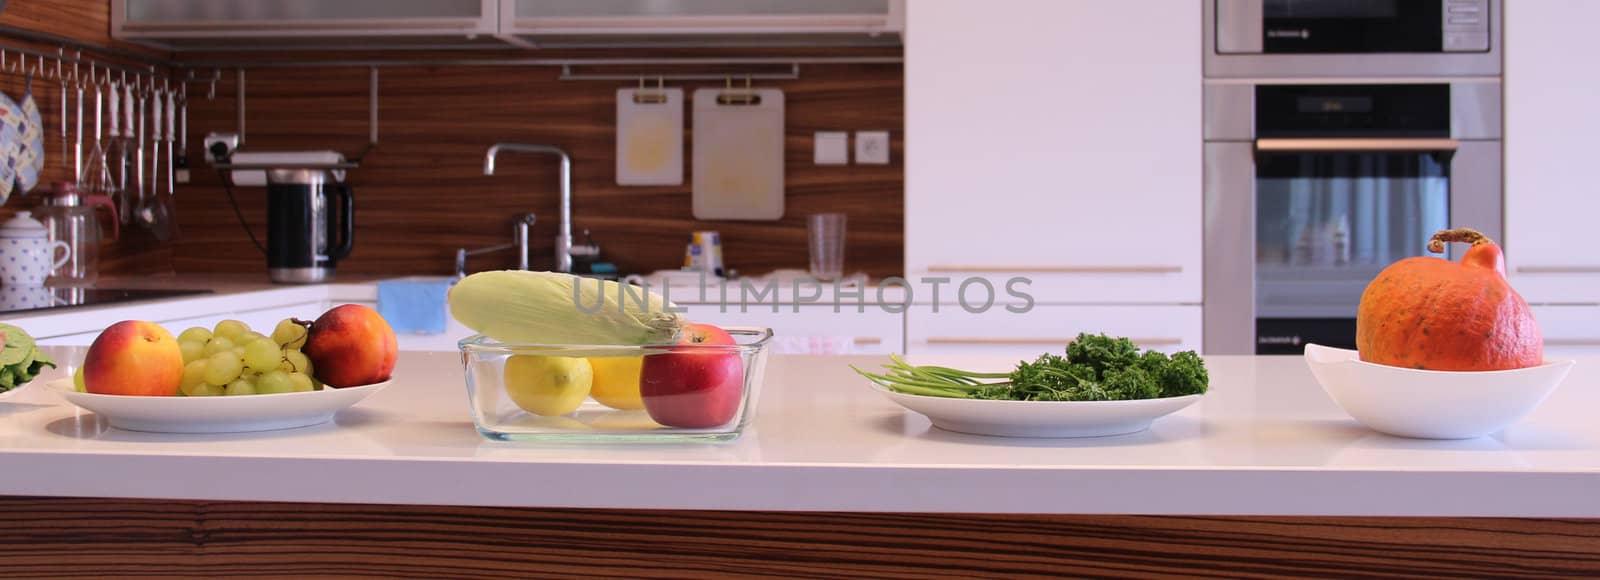  
Well designed modern kitchen with a big variation of ripe fruit and vegetables on the table
